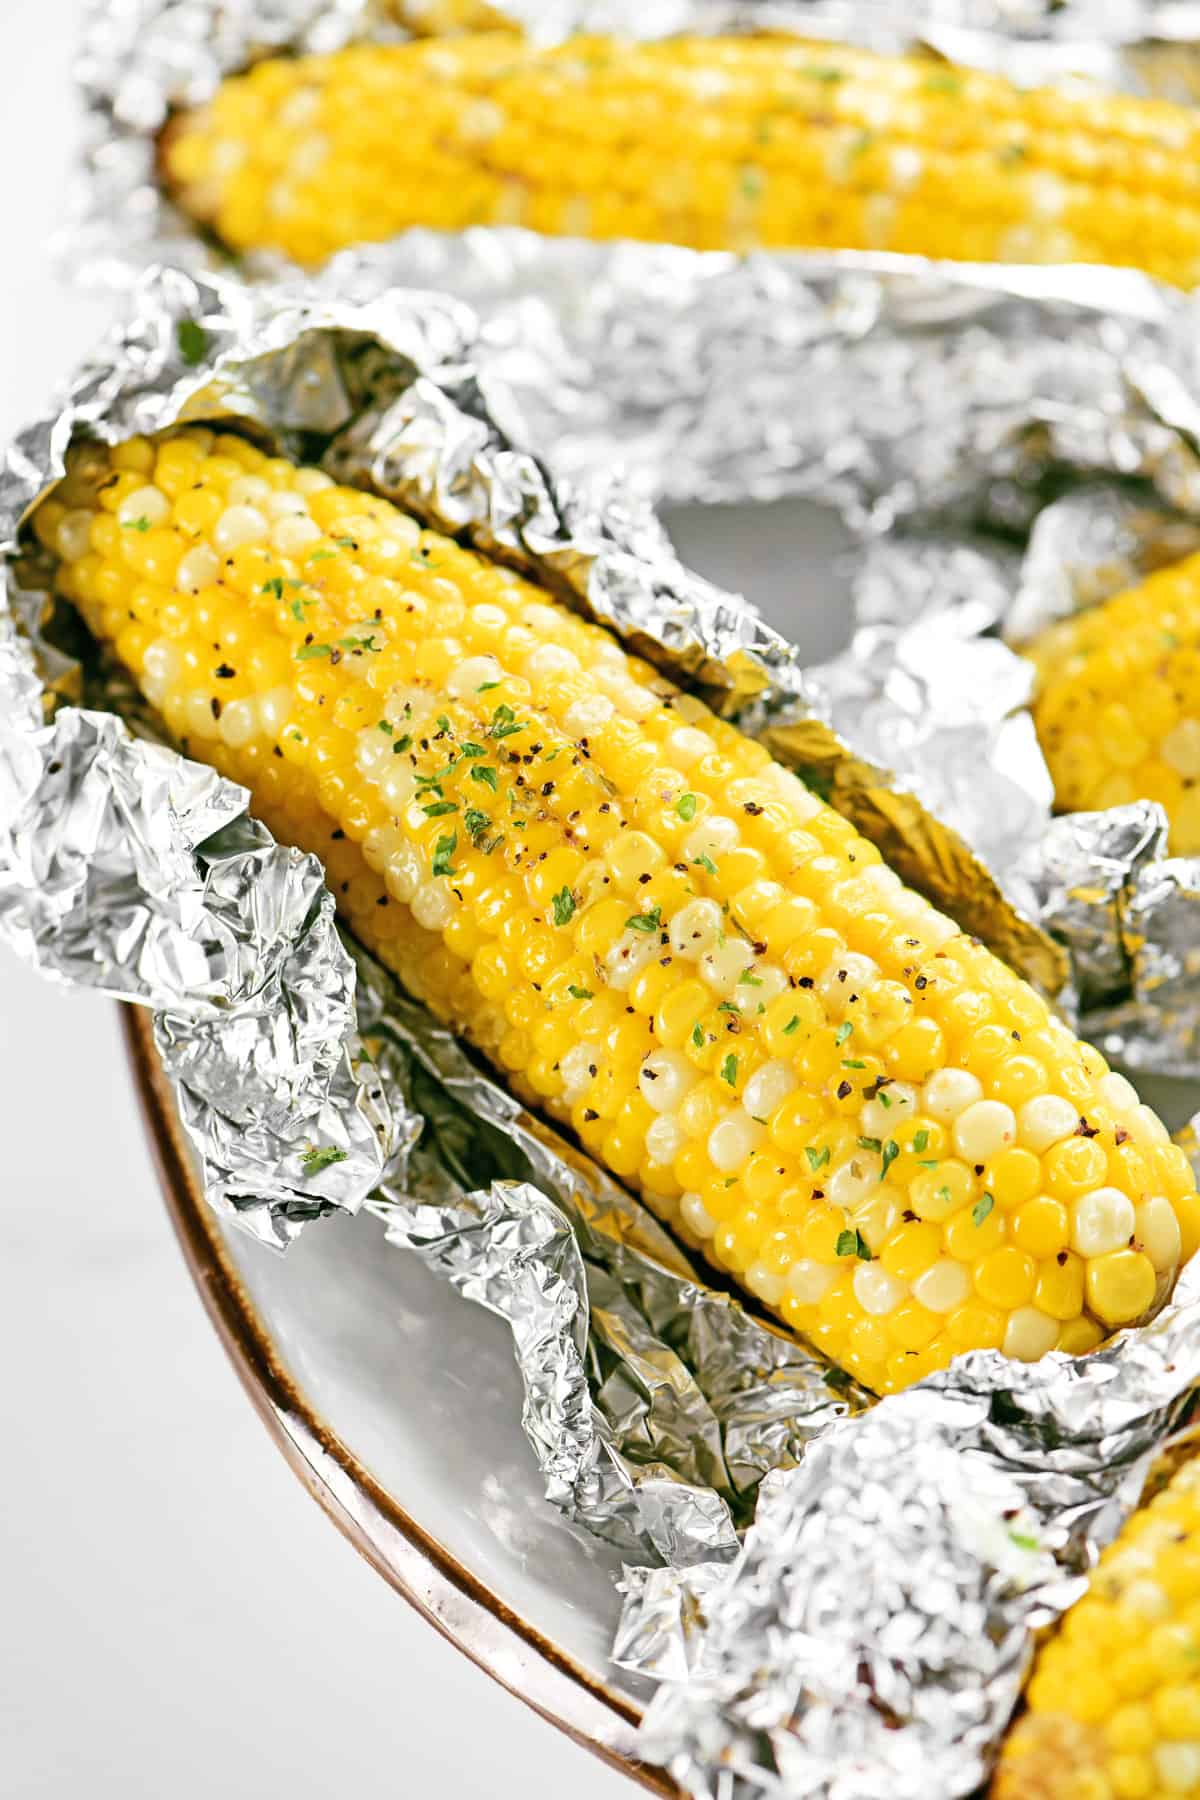 Grilled corn on the cob in foil with butter and herbs.